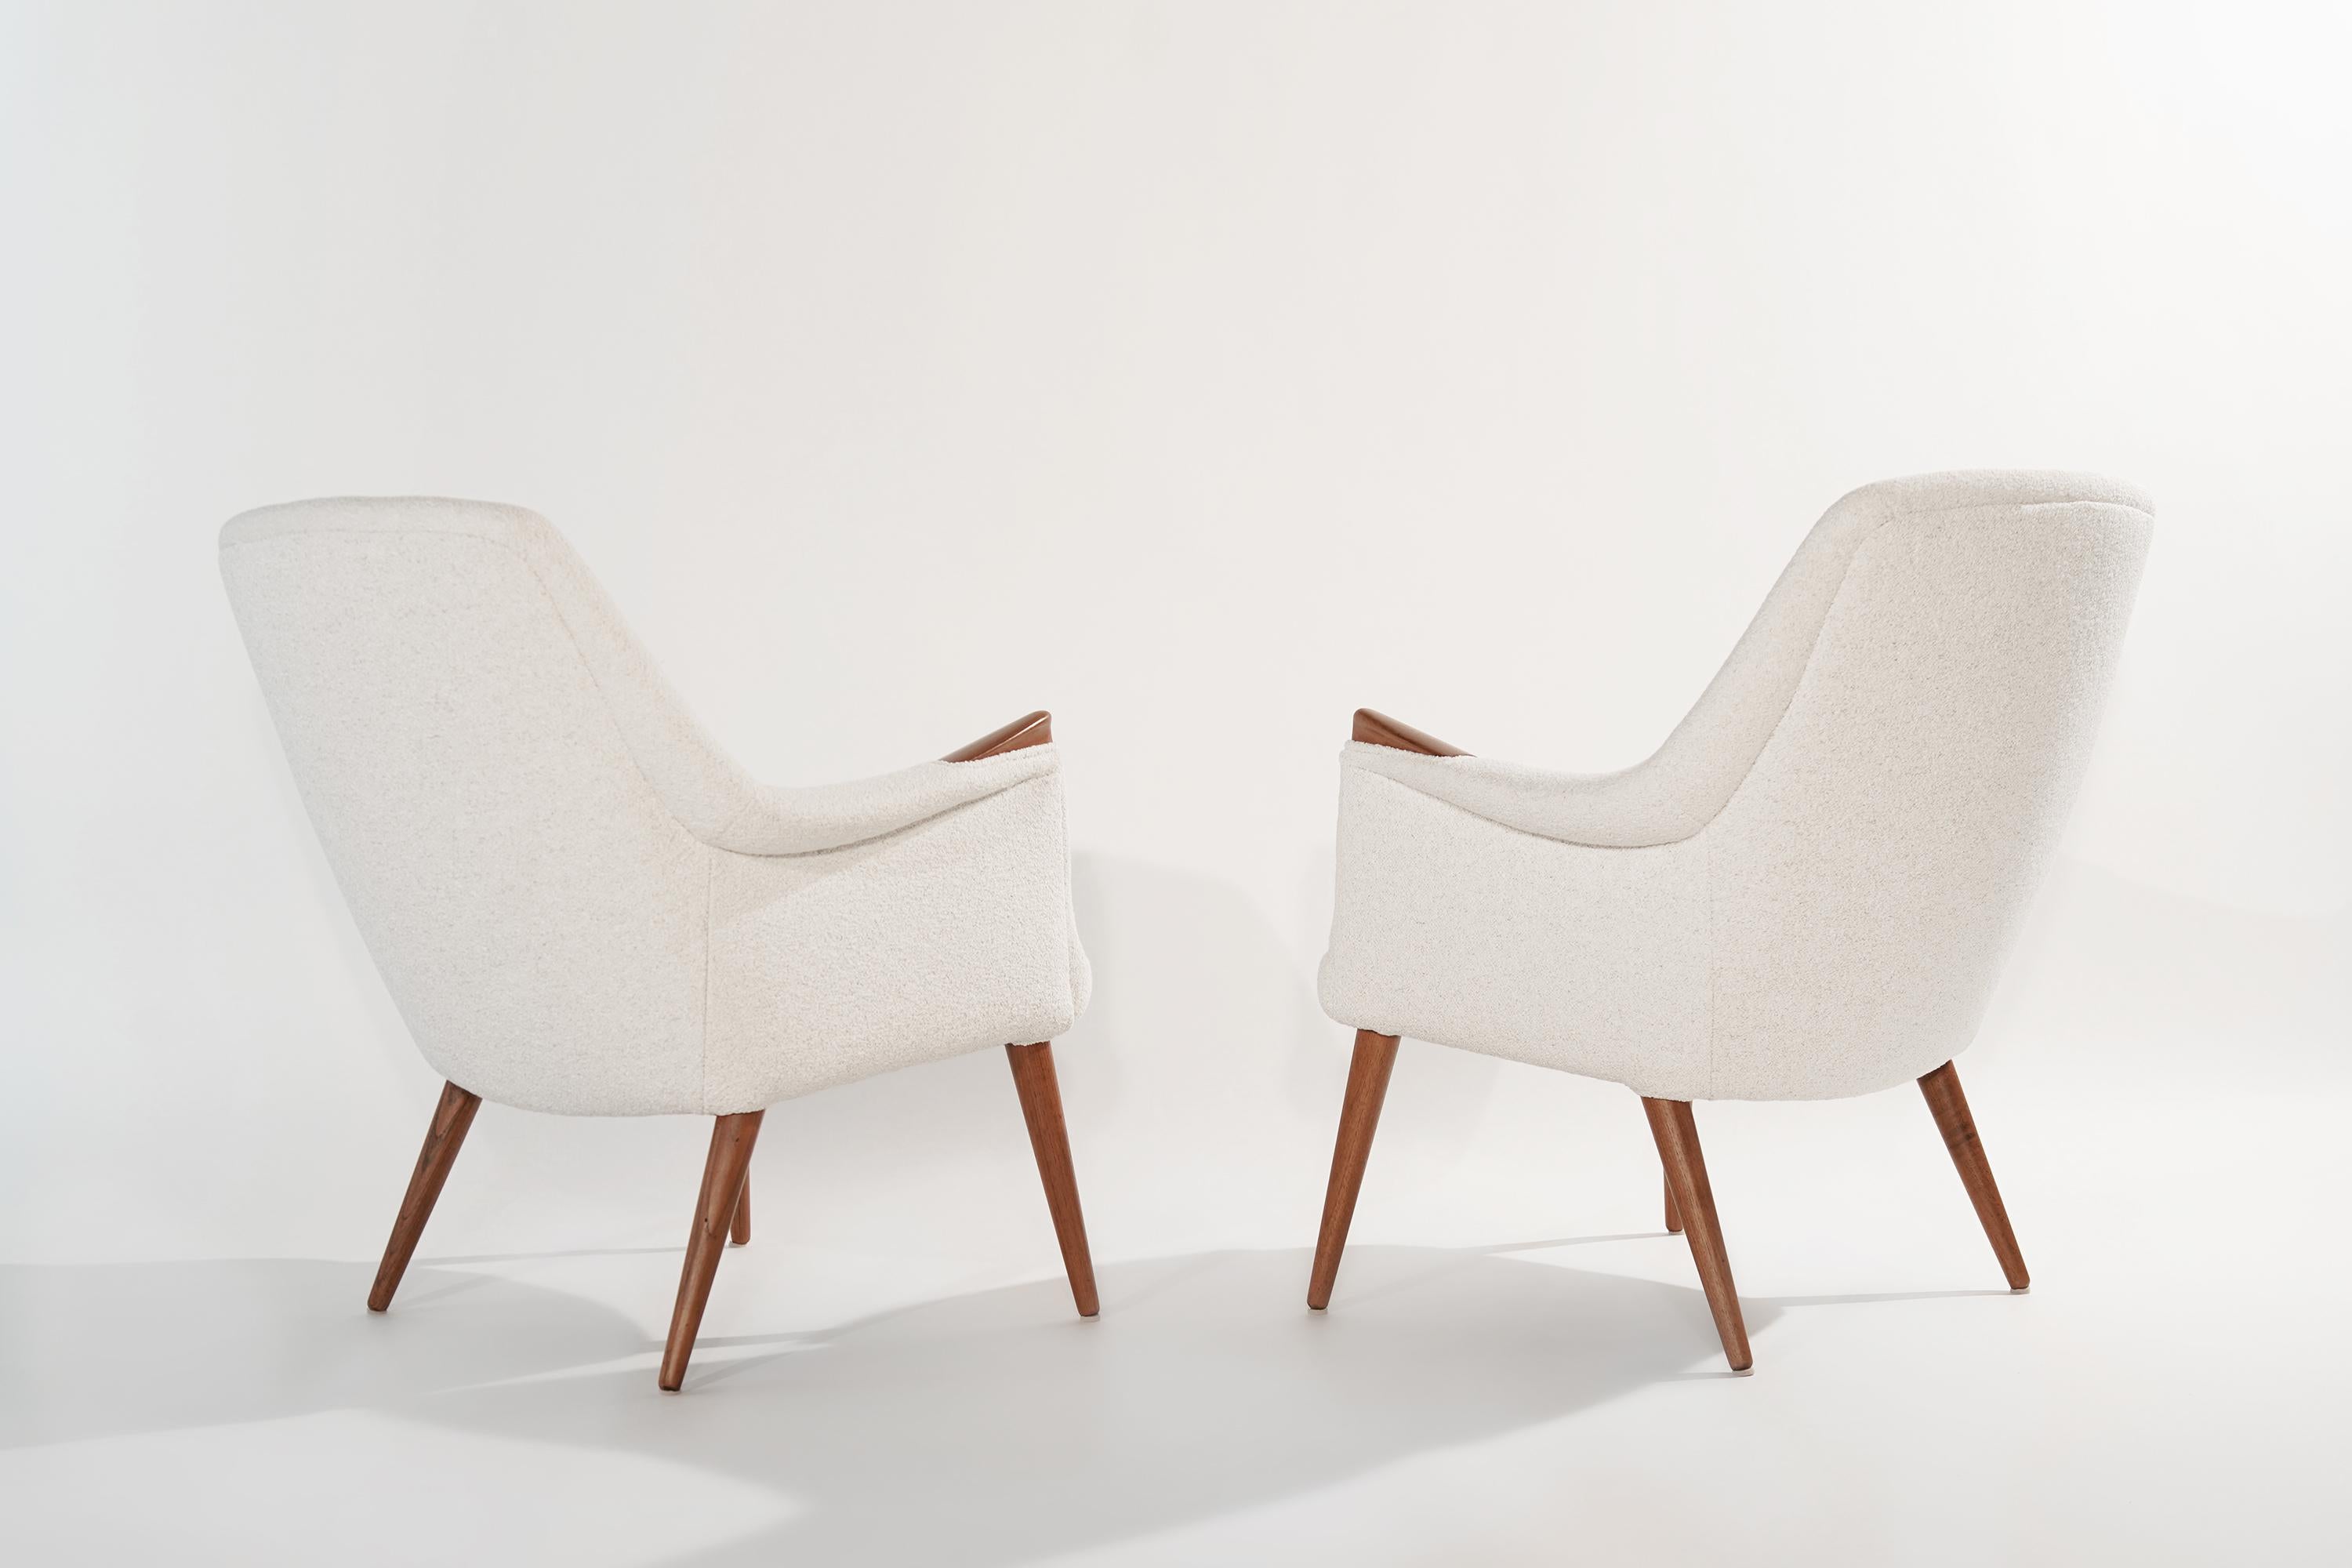 A rare set of Scandinavian-Modern lounge chairs designed by Gerhard Berg, Norway, circa 1950s. Newly upholstered in Italian boucle, teak legs and arm accents fully restored.

Other designers of the period include, Finn Juhl, Kaare Klint, Hans